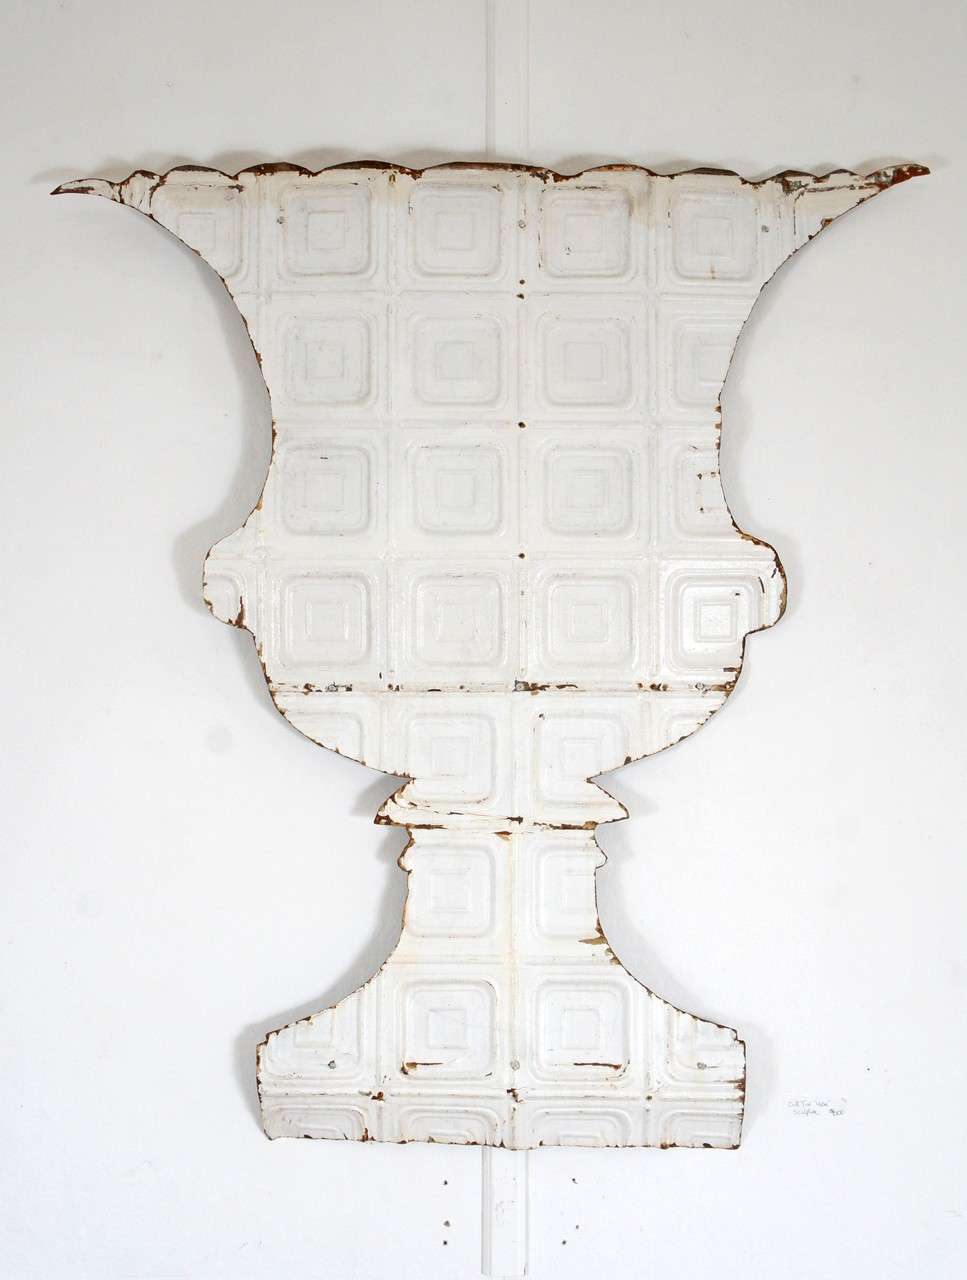 The Material for this Cut- Out Wall Sculpture is Early 20th Century
Tin Ceiling Panels